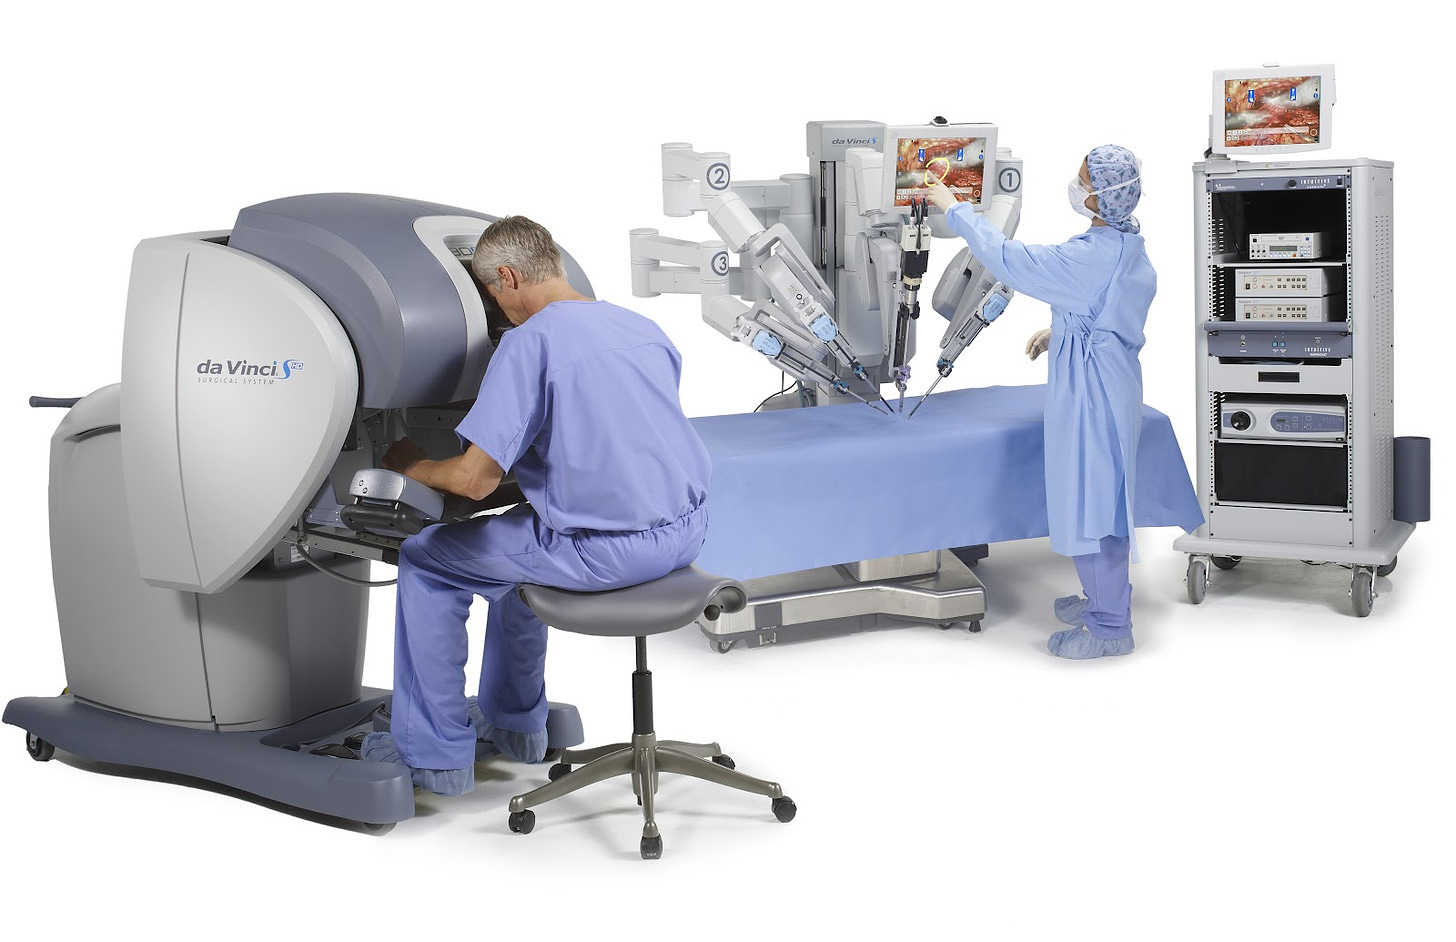 3 Top Robotic-Surgery Stocks to Consider Buying Now | The Motley Fool